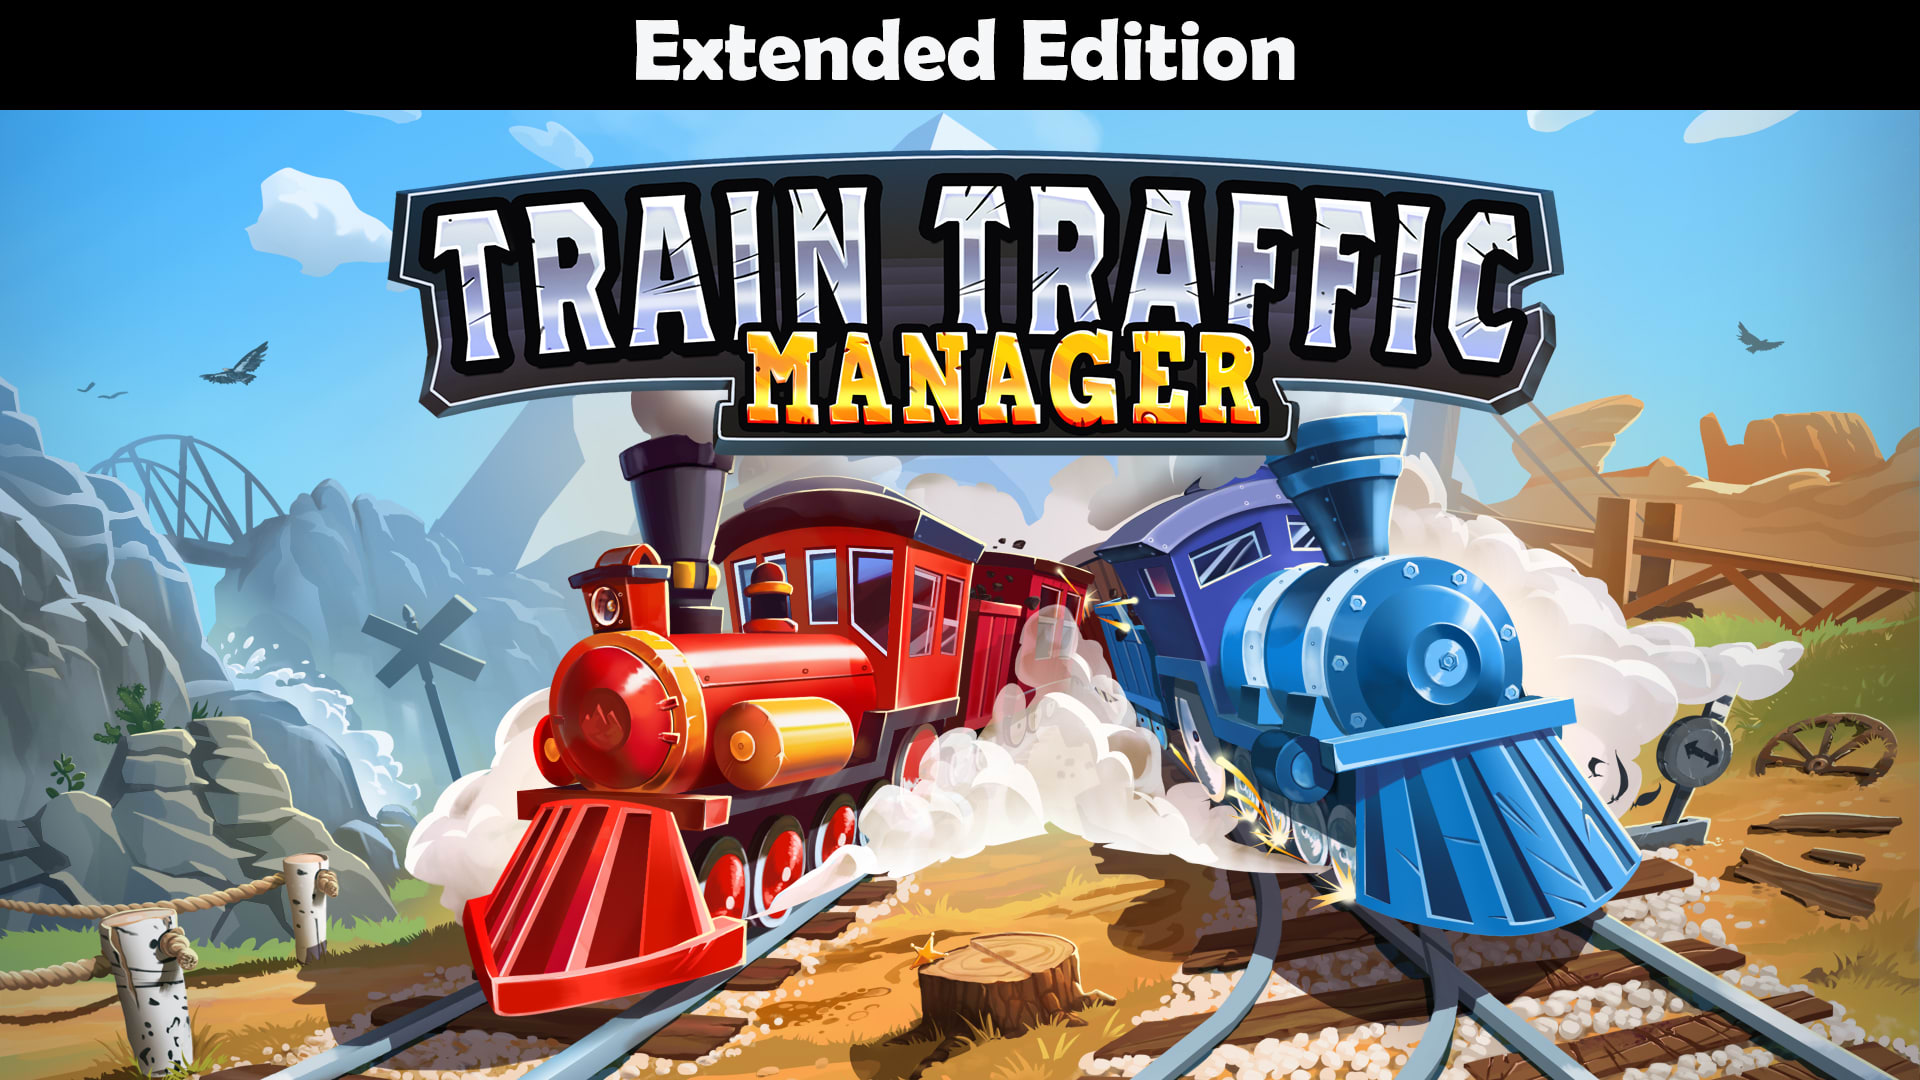 Train Traffic Manager Extended Edition